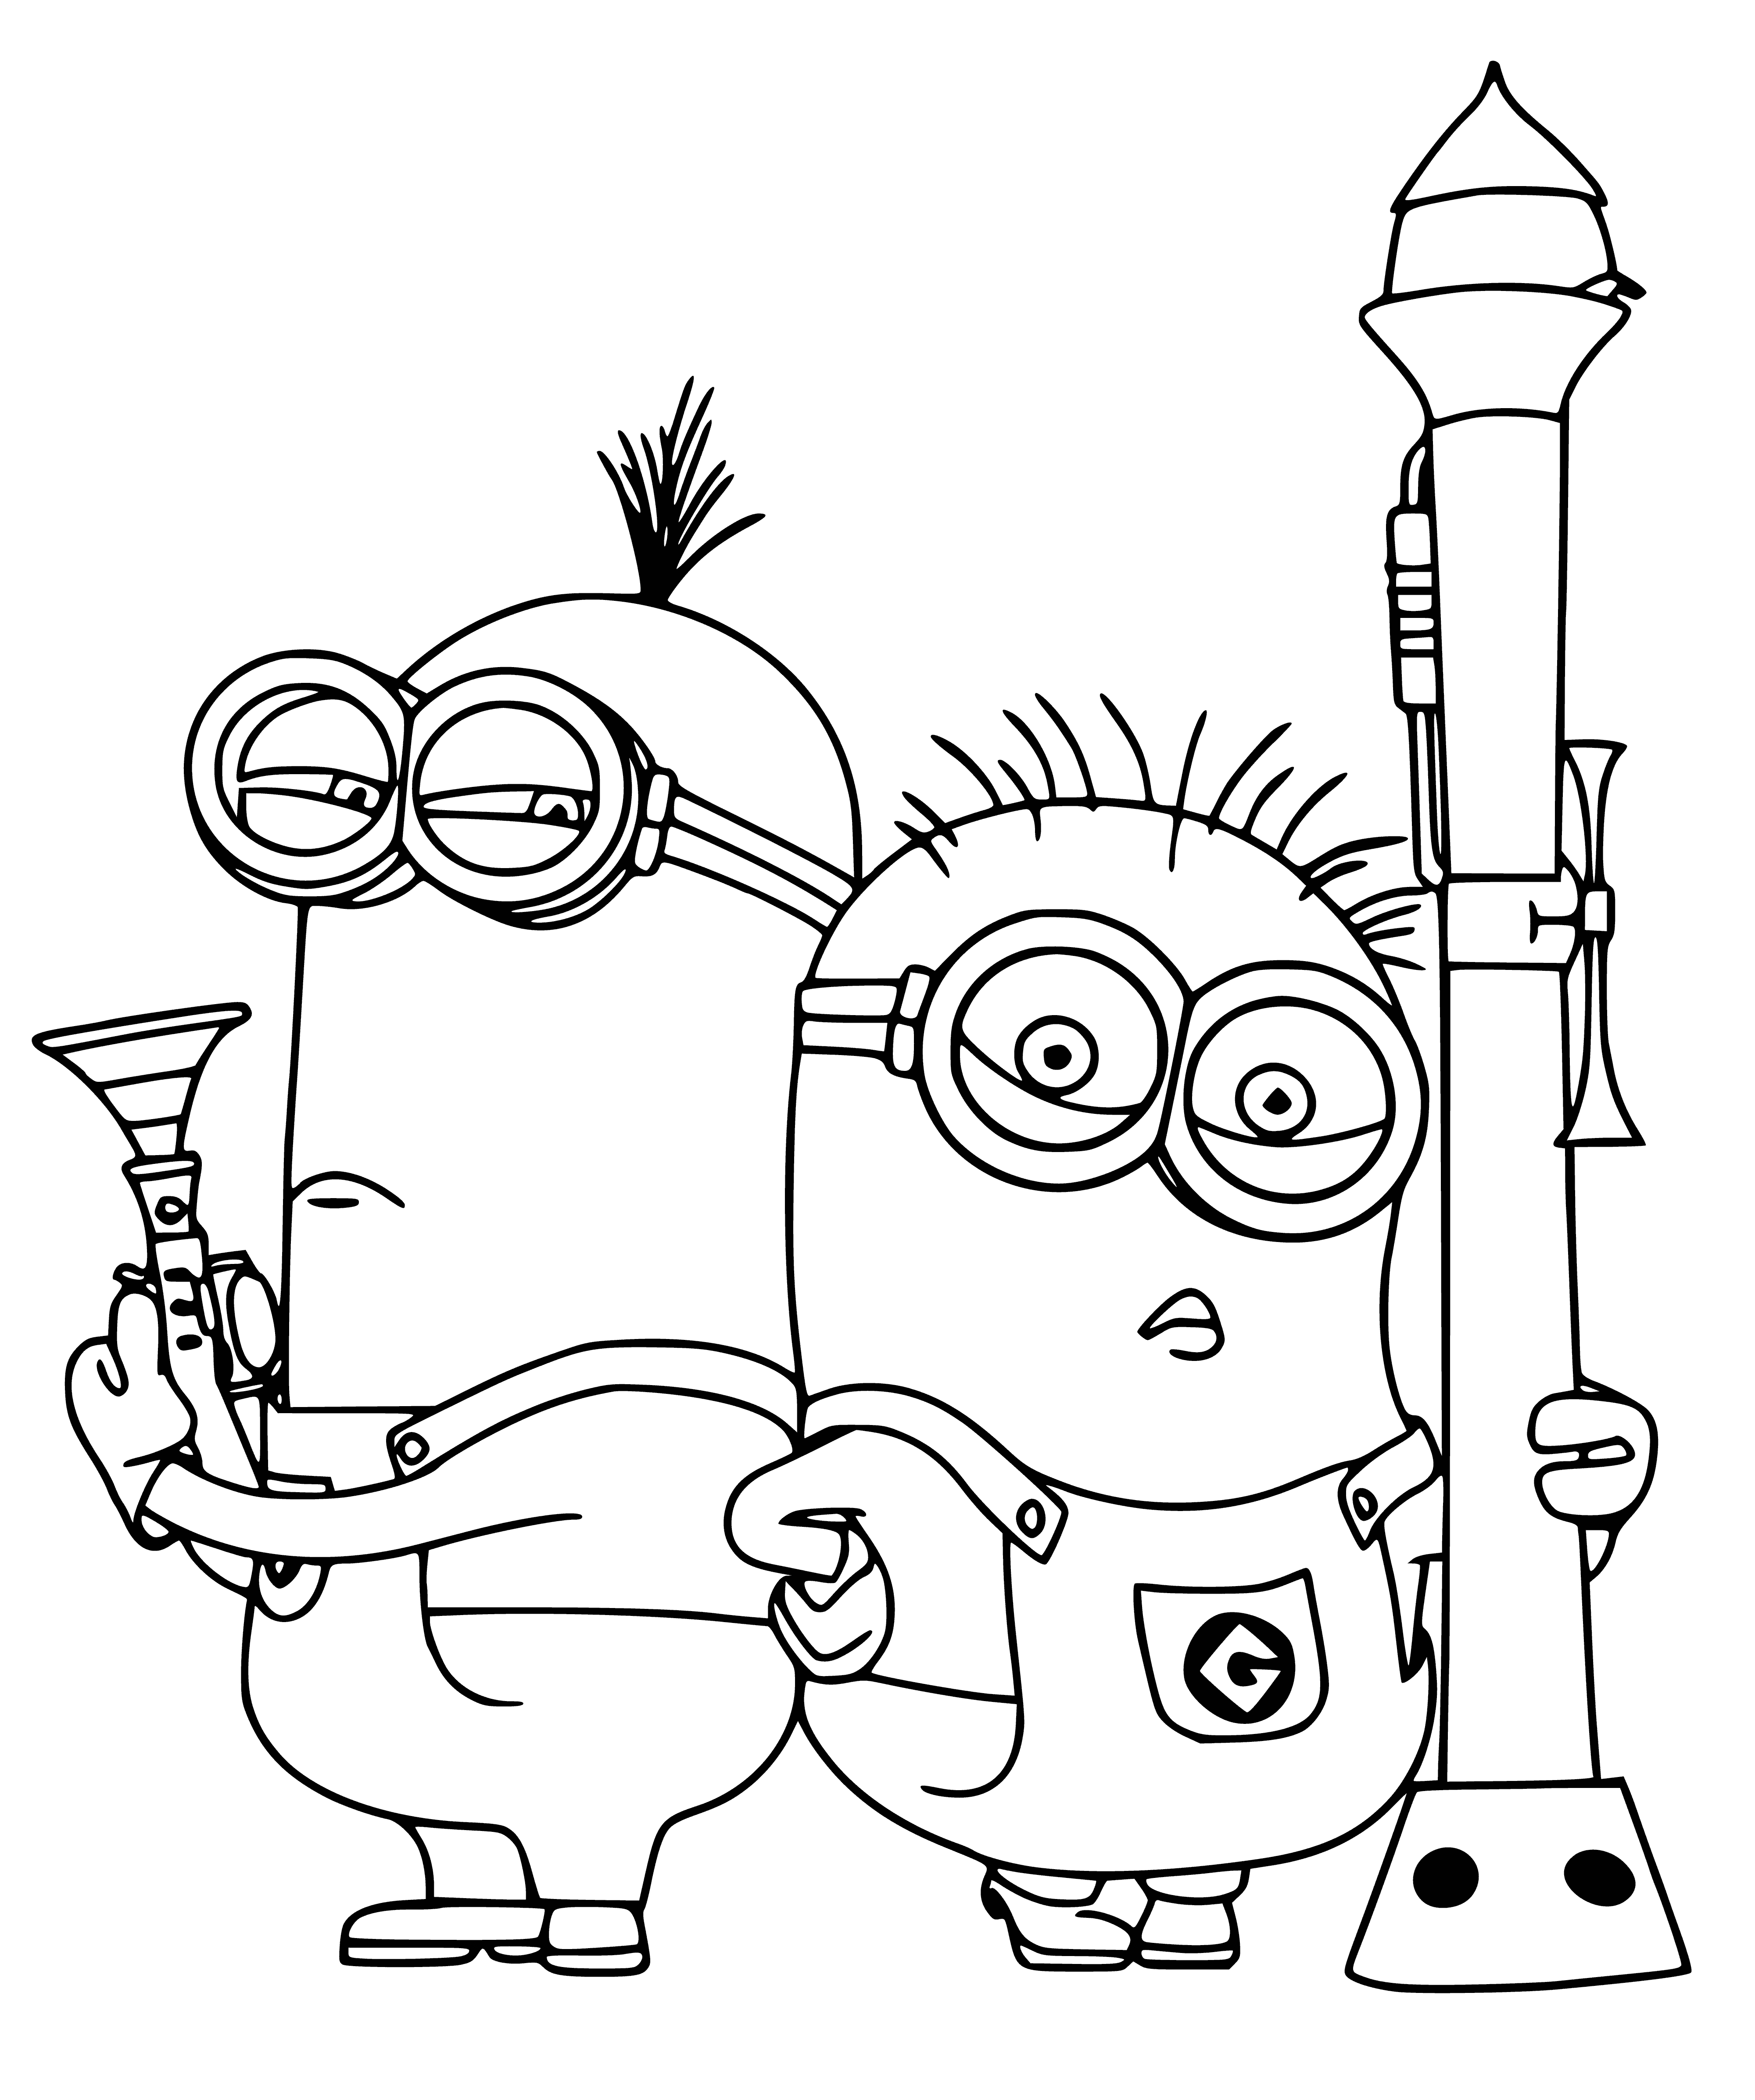 coloring page: 3 Minions in yellow shirts & blue jeans with swords/ax. #coloringpage